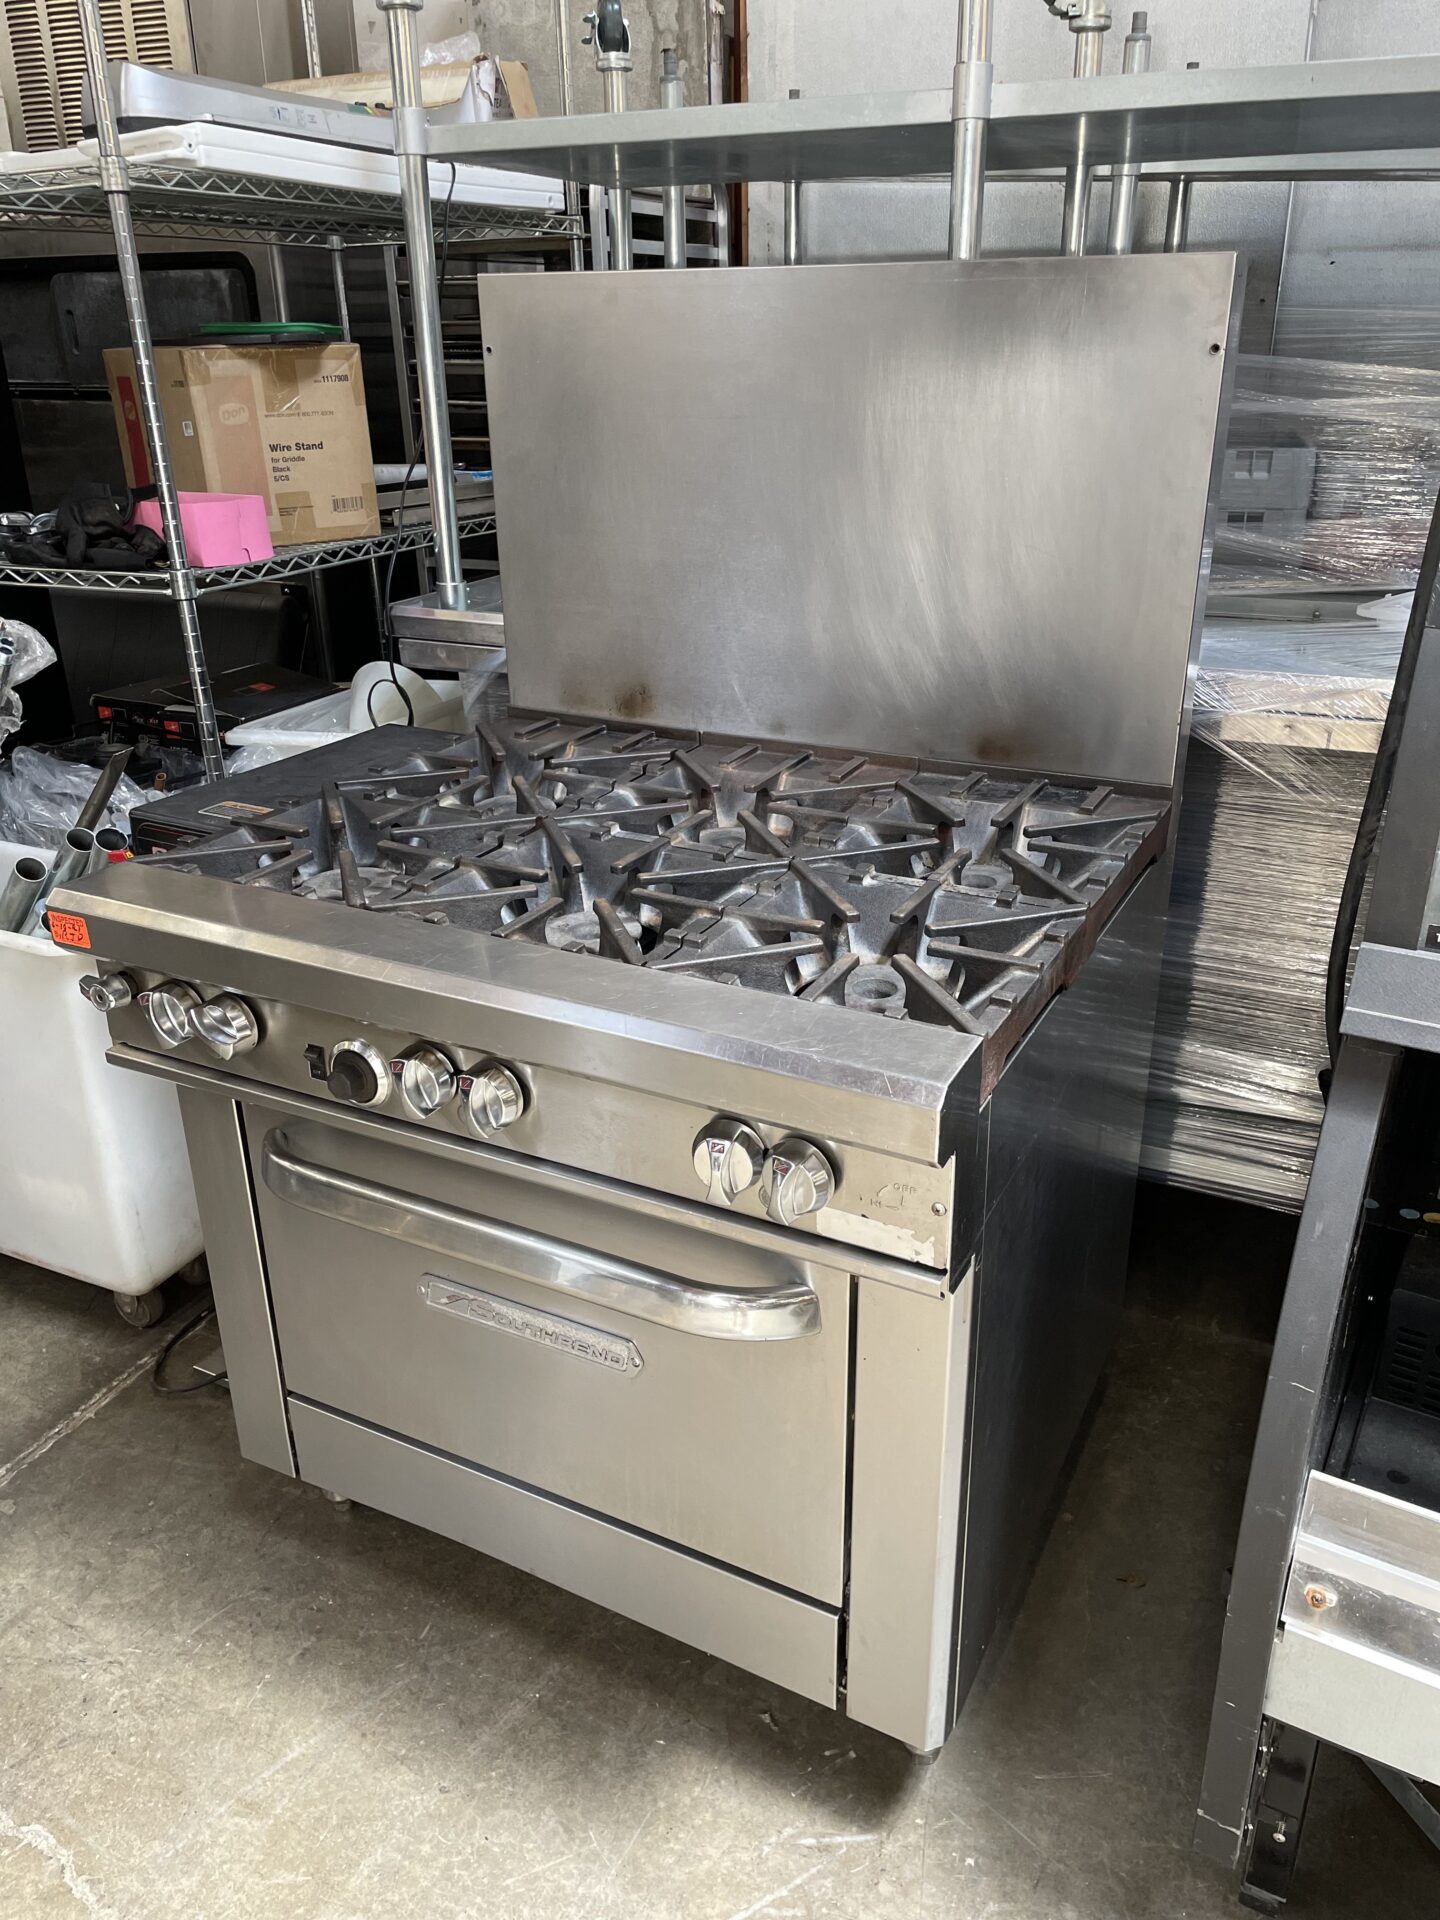 A used kitchen stove